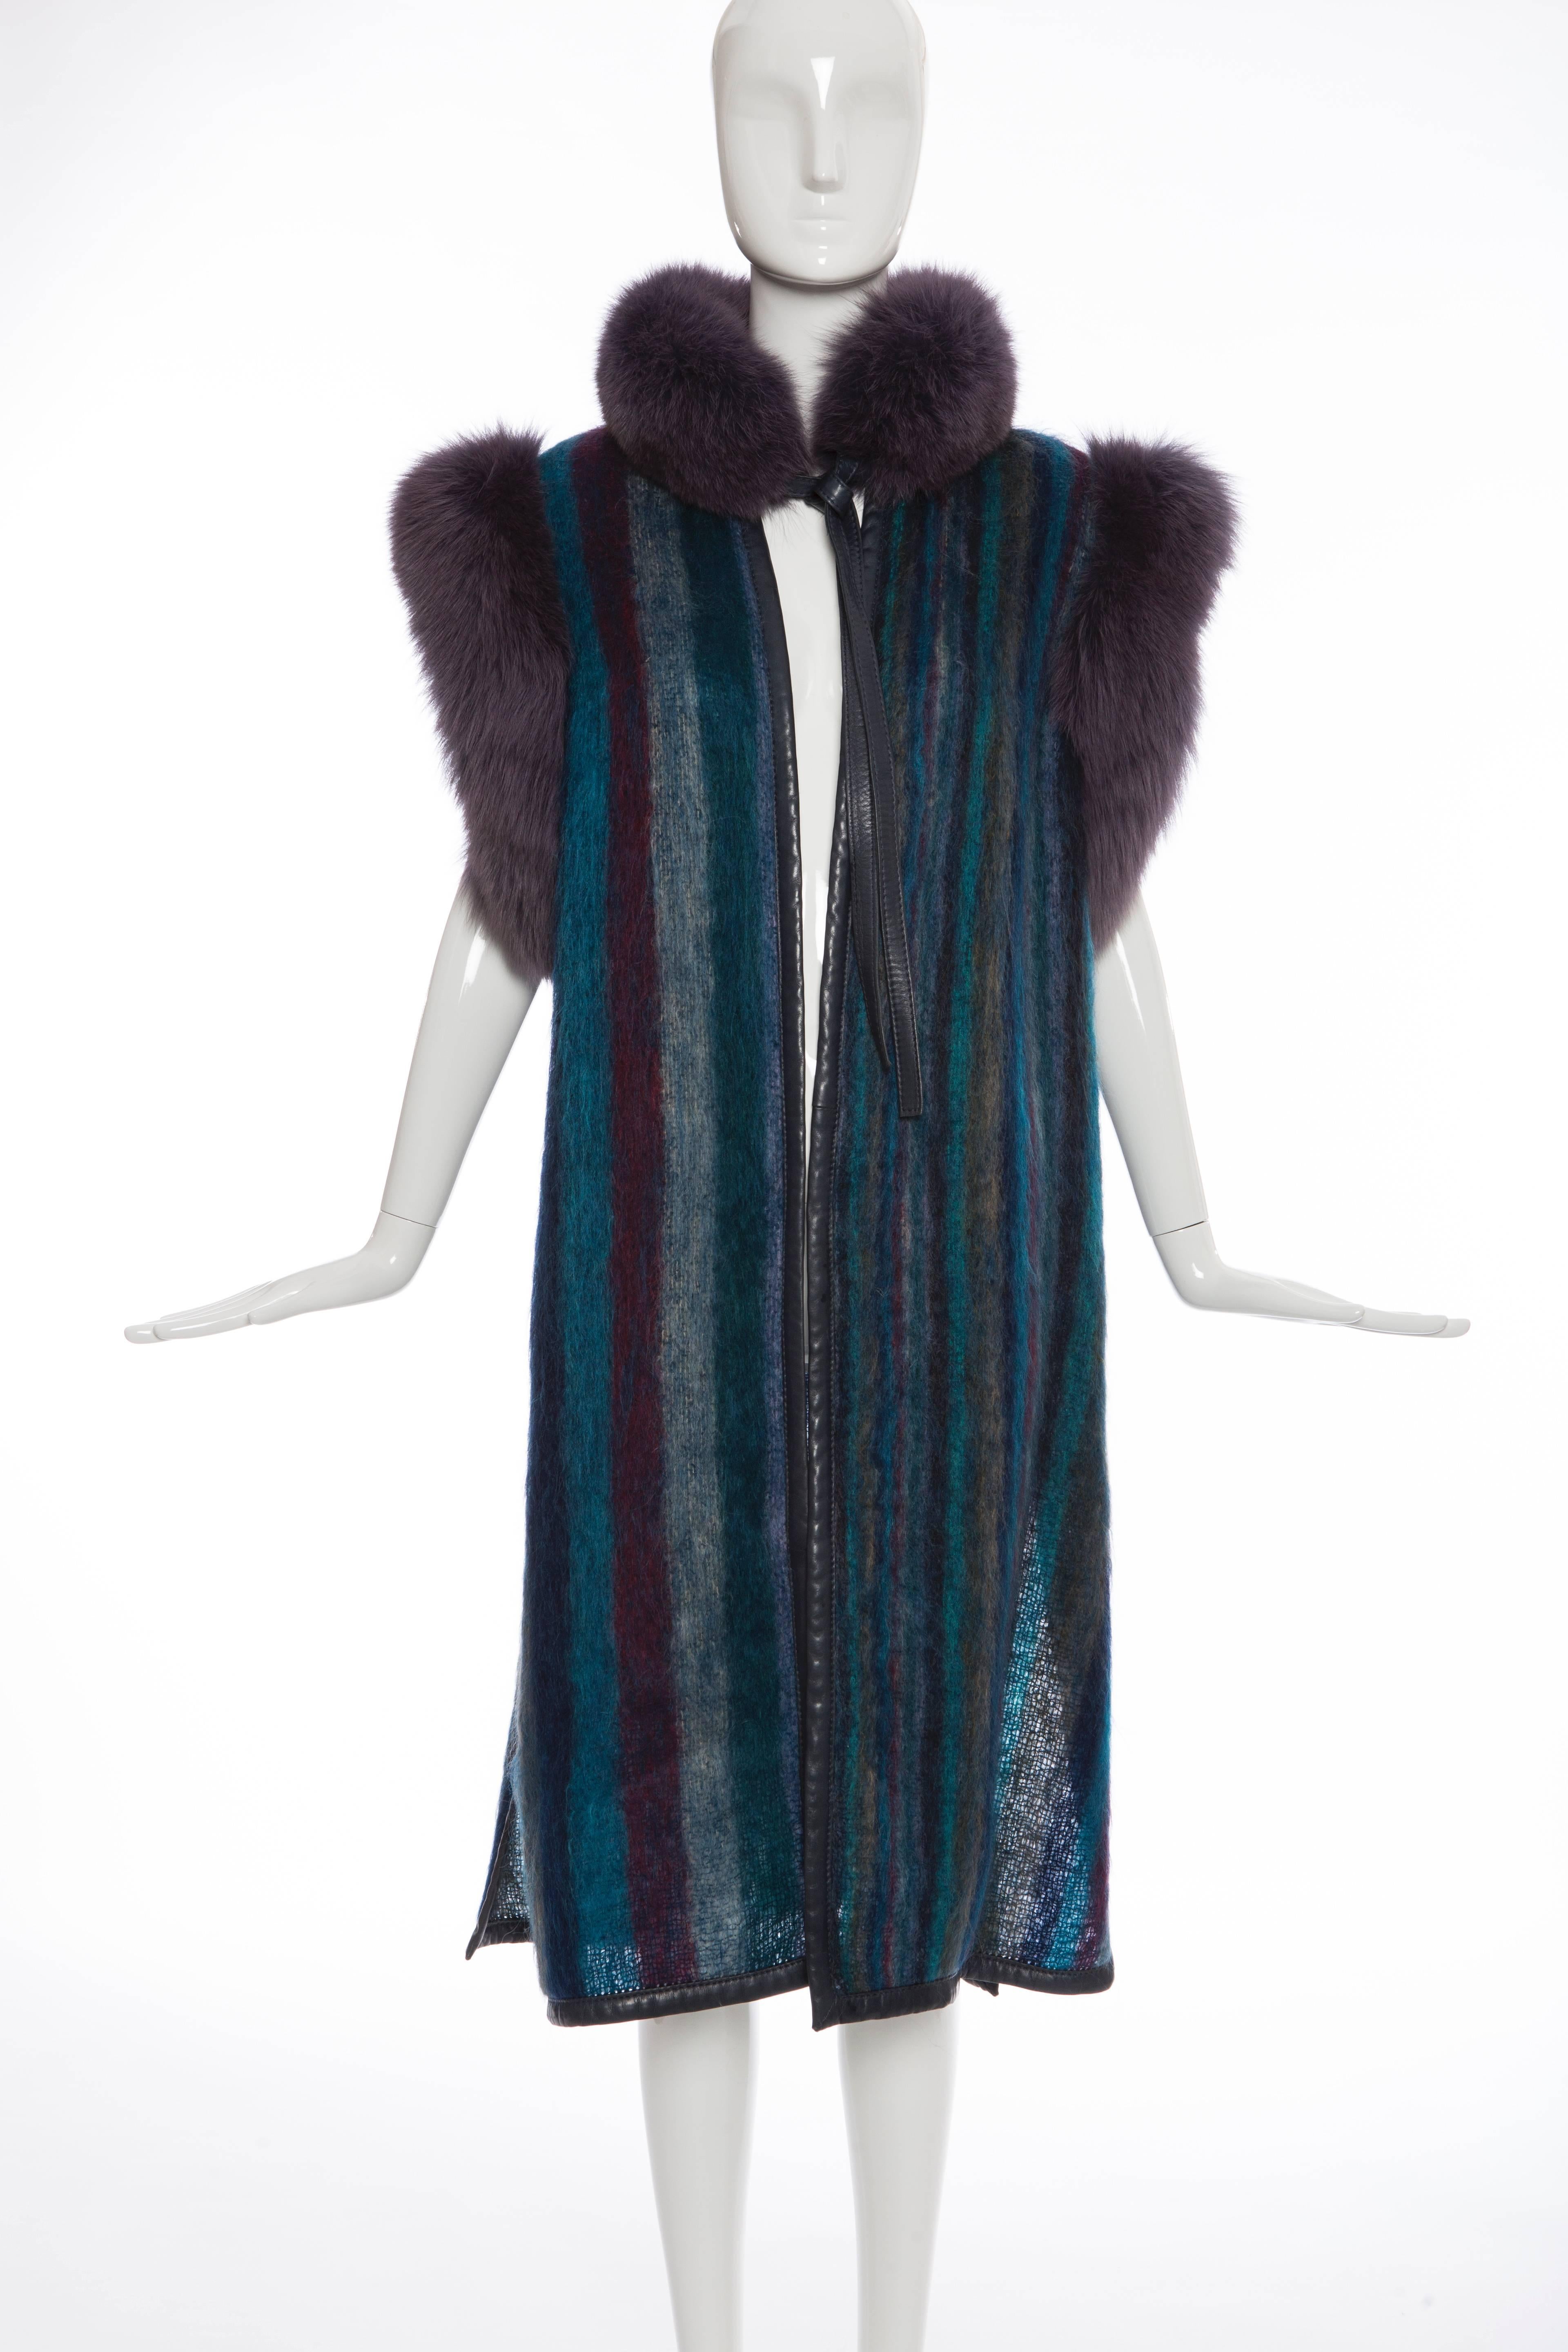 Christian Dior Boutique Fourrure by Frédéric CASTET, circa 1980's, striped mohair vest with leather trim, fox fur collar and trim at underarms, slit at sides, button closure at sides and  leather self tie closure at neck.

 Bust 44”, Waist 44”,